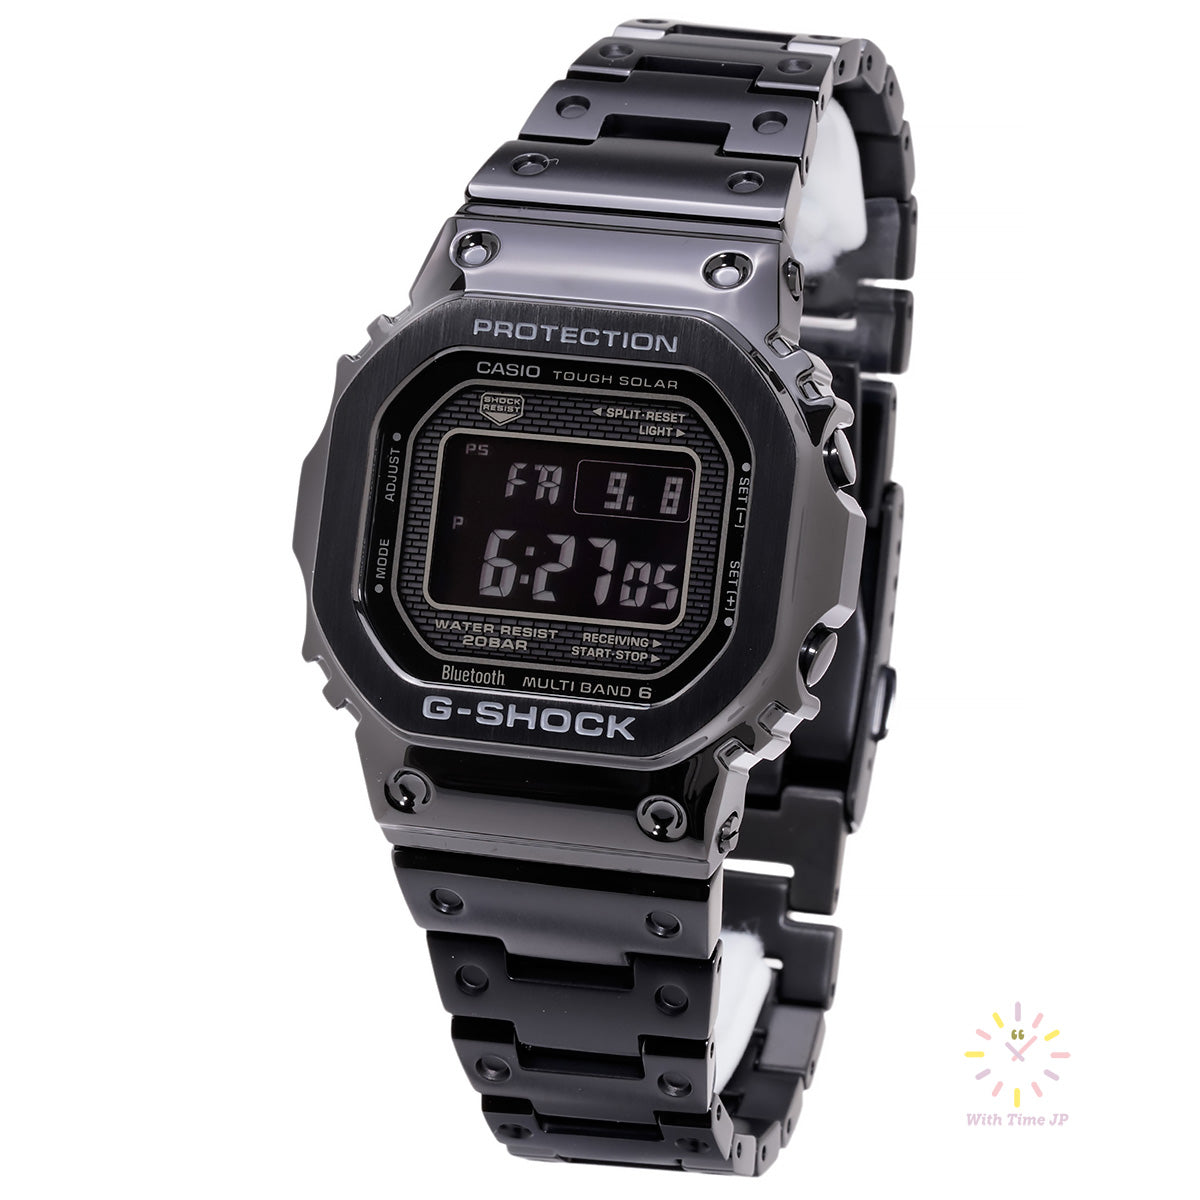 CASIO FULL METAL 5000 SERIES GMW-B5000GD-1JF – With Time JP